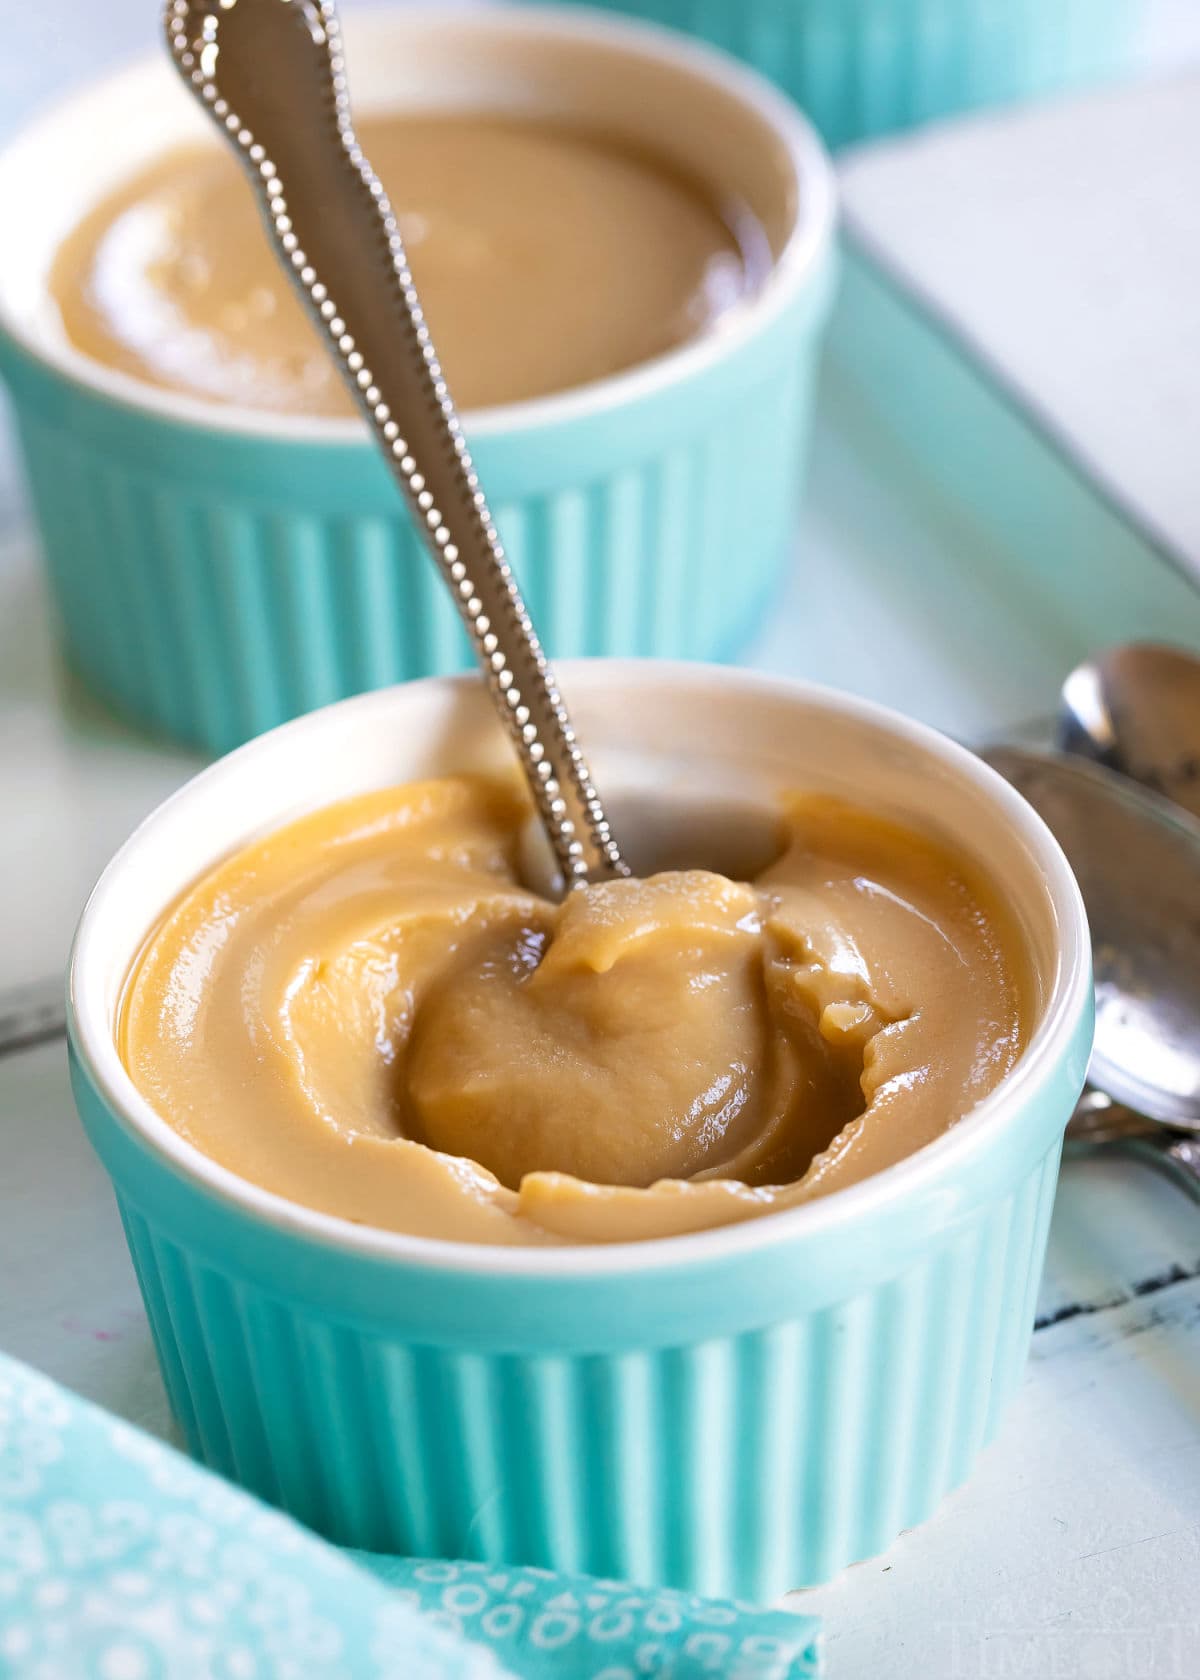 butterscotch pudding recipe with some eaten